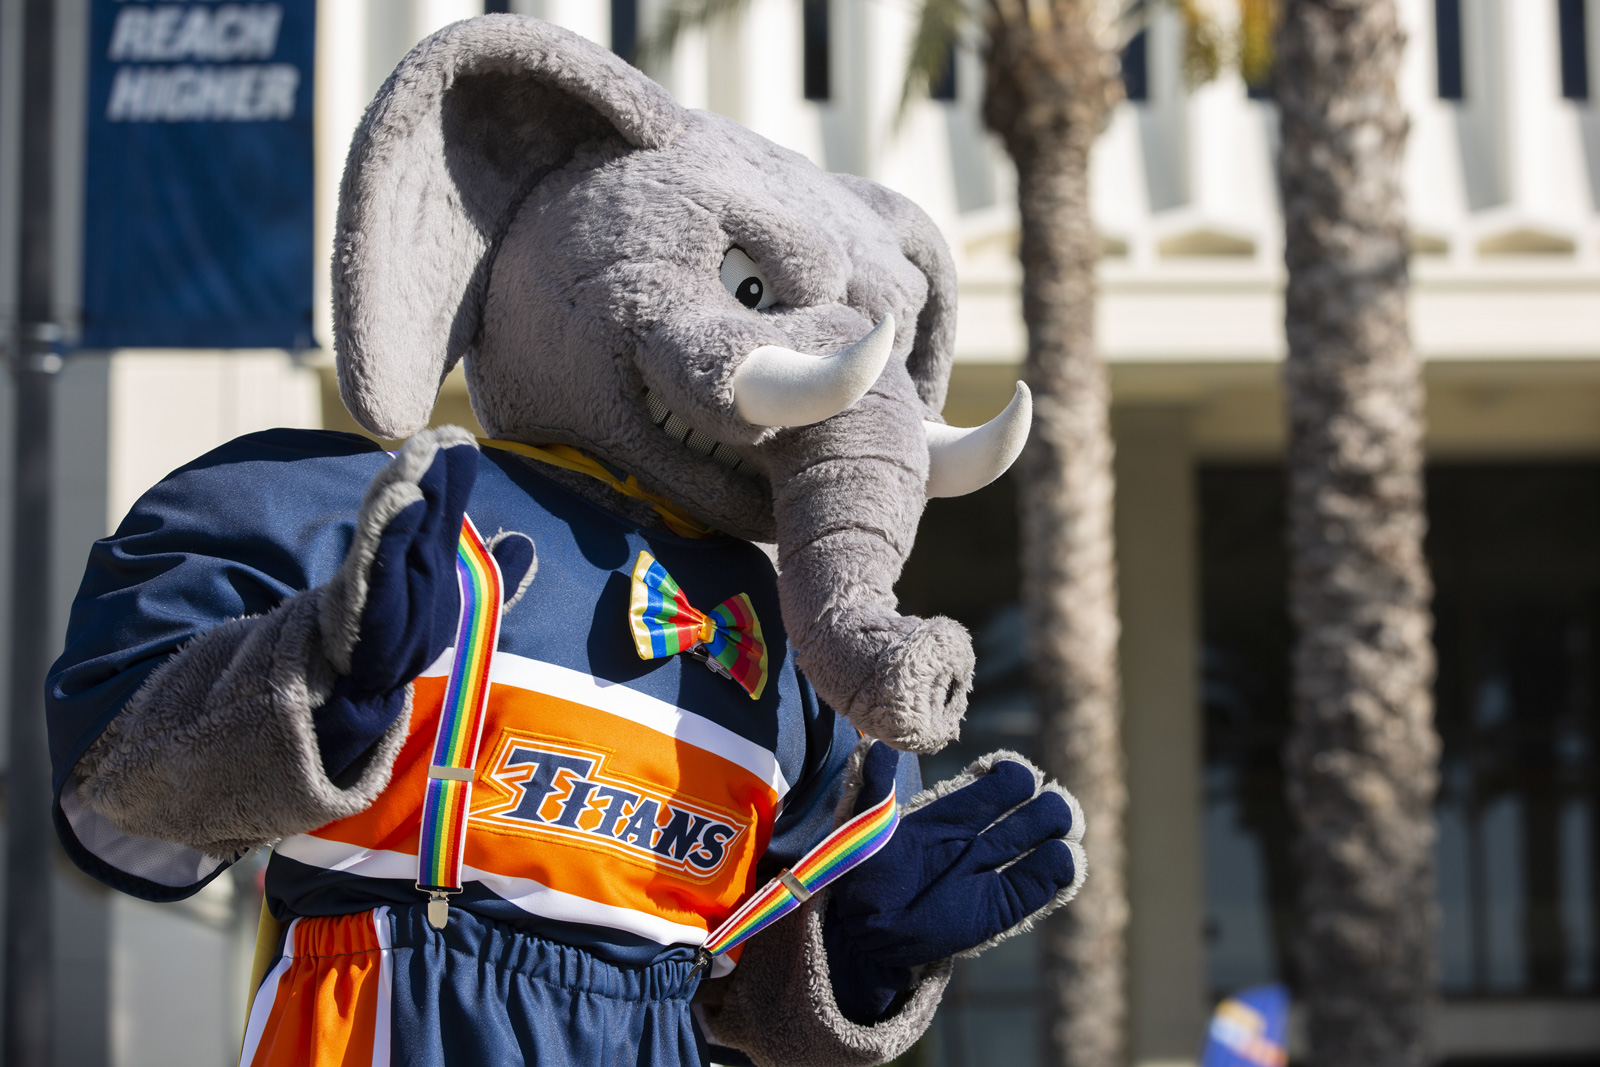 Tuffy the Titan is dressed to the nines for CSUF’s annual pride flag raising ceremony, 2019.